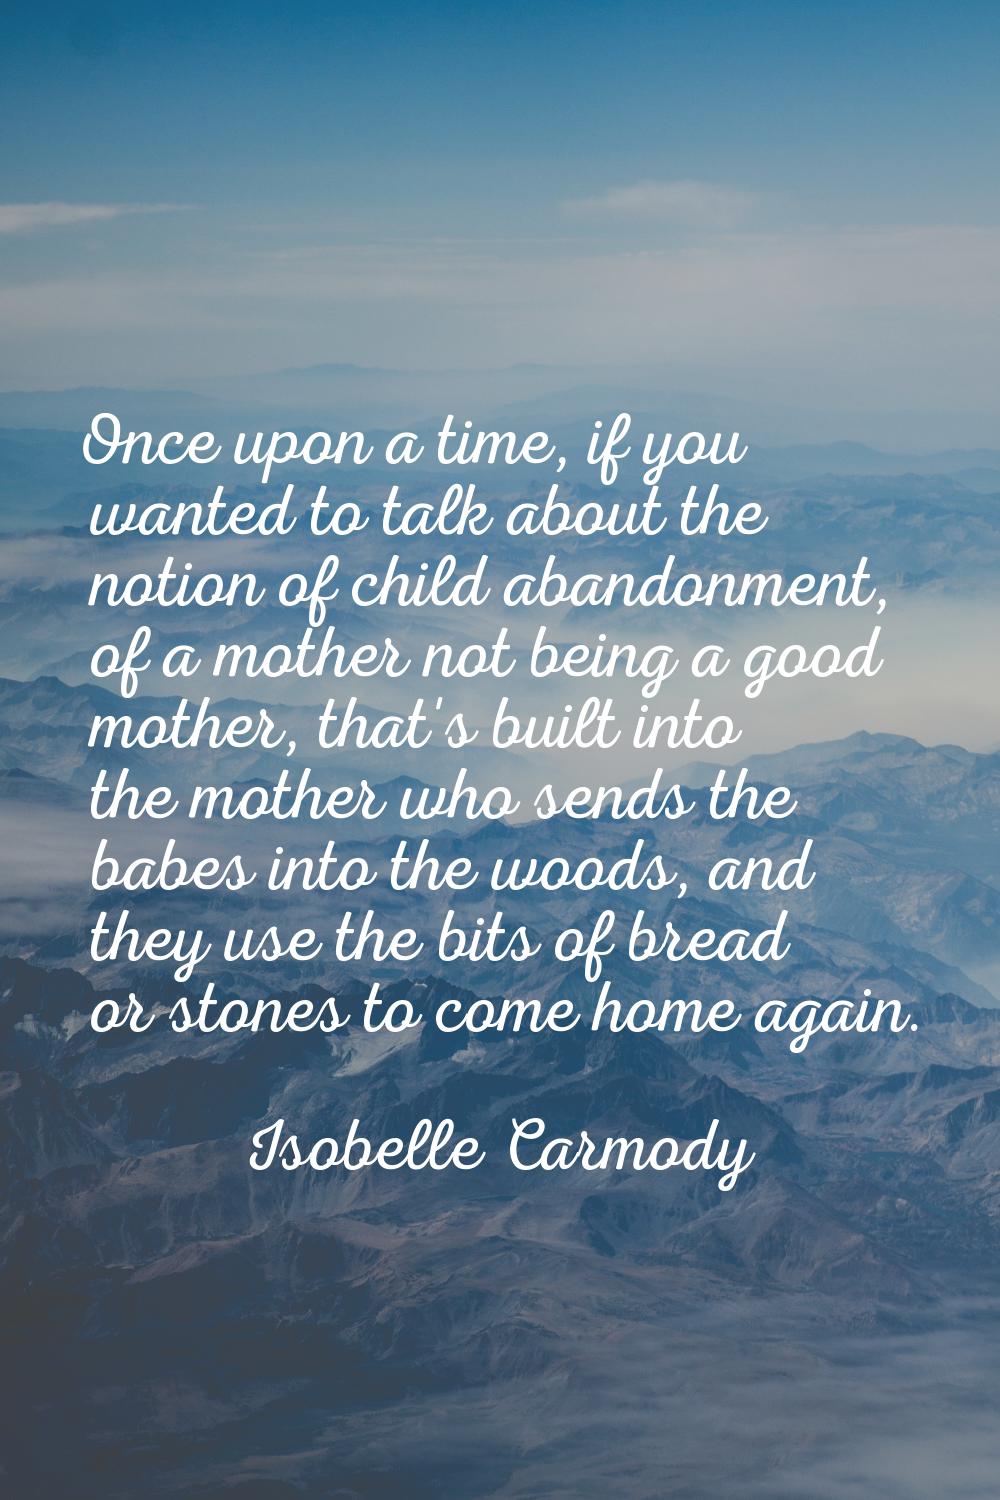 Once upon a time, if you wanted to talk about the notion of child abandonment, of a mother not bein